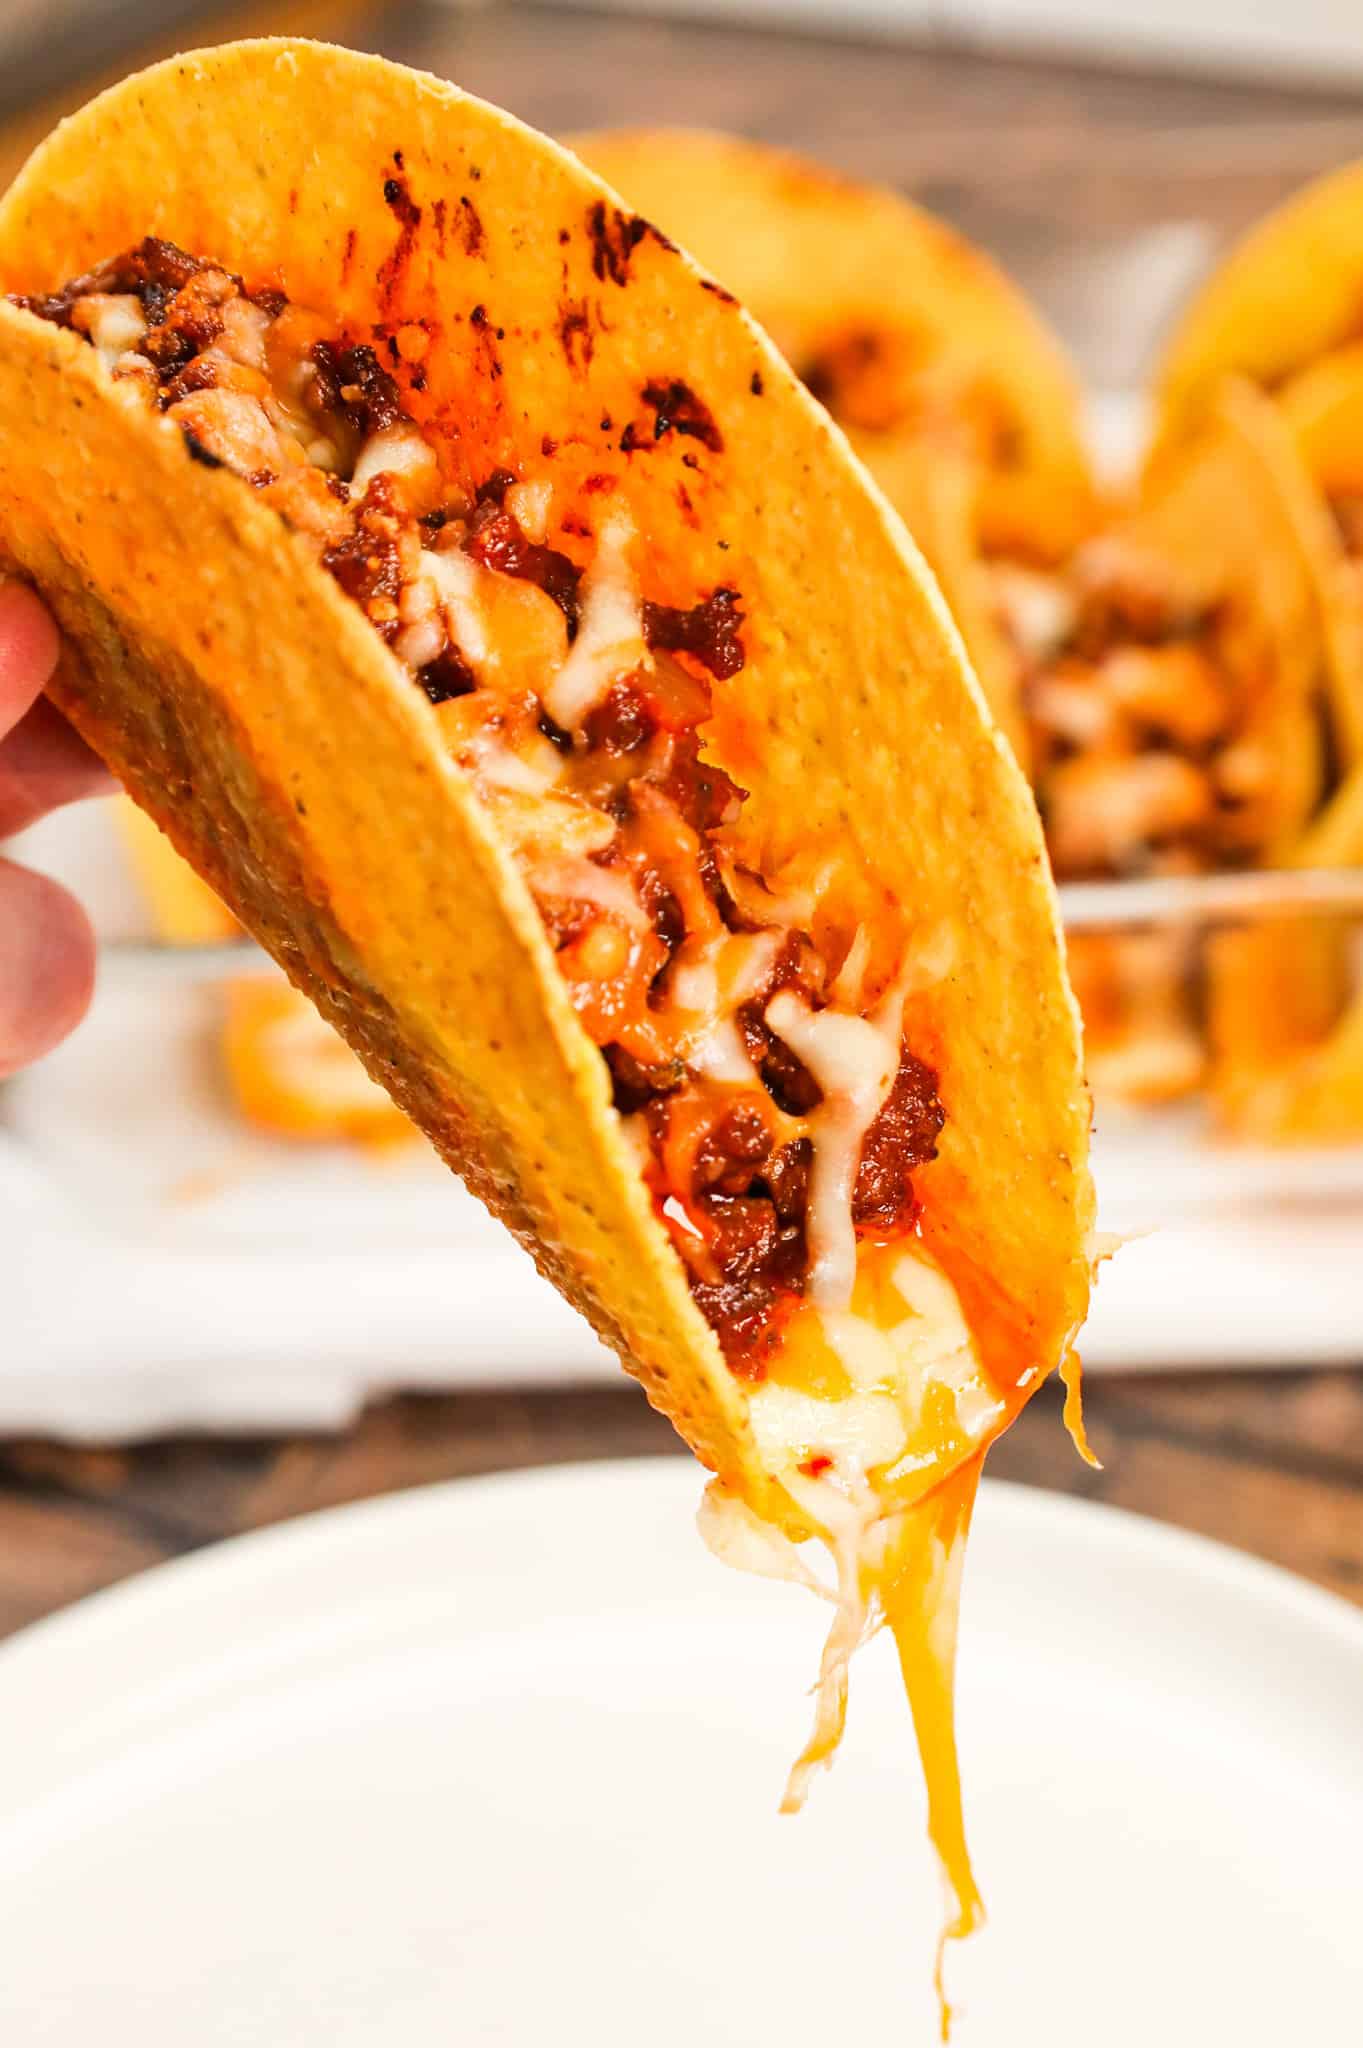 Sloppy Joe Tacos are hearty ground beef tacos with sloppy joe sauce and baked with cheese.